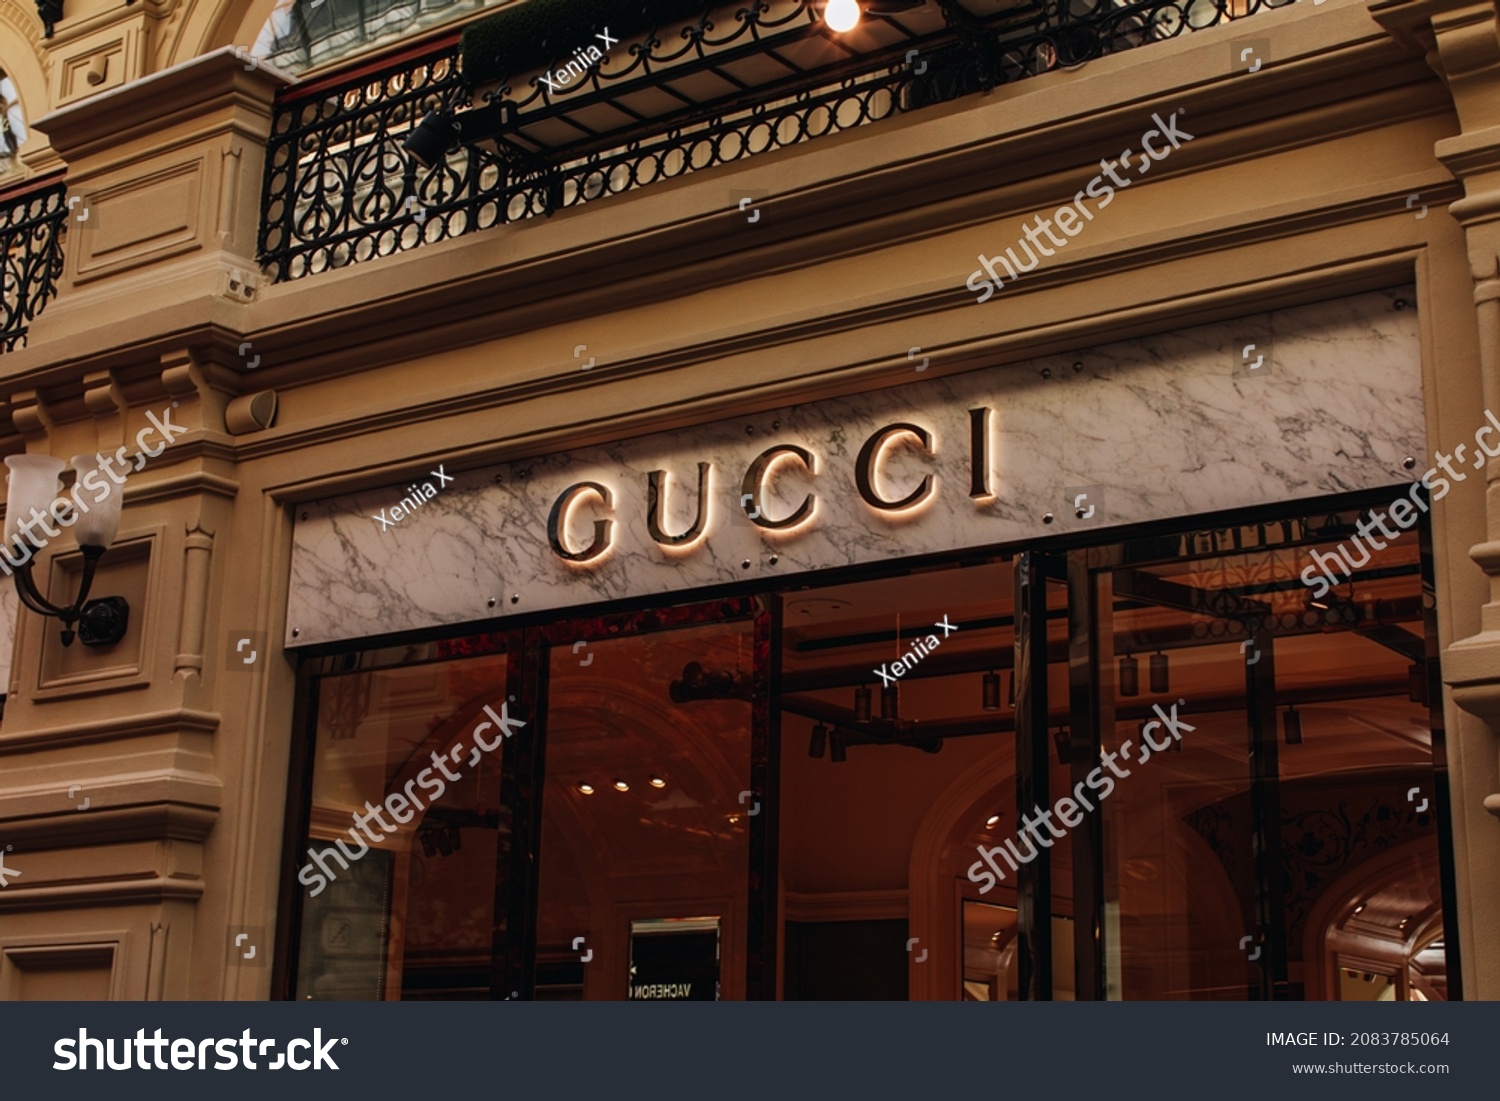 1,502 Gucci sign Images, Stock Photos & Vectors | Shutterstock